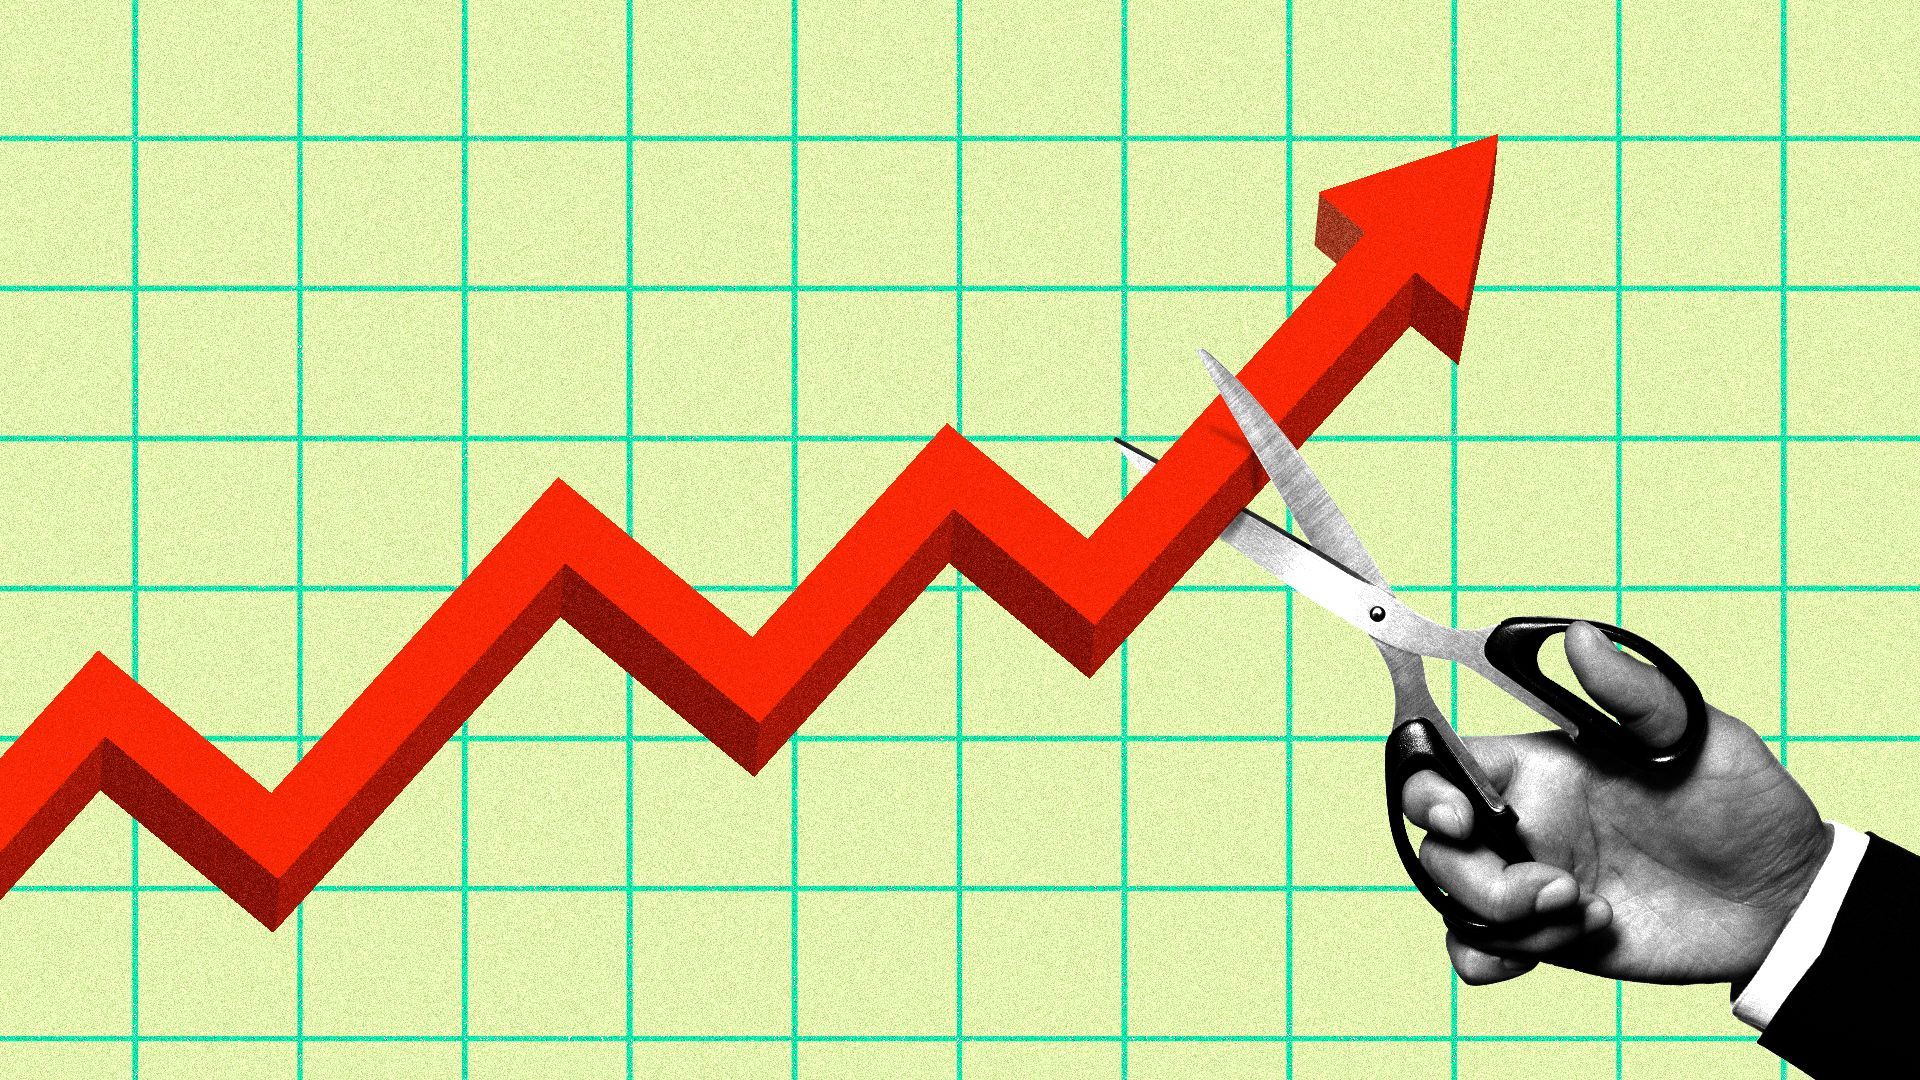 Illustration of graph showing stock arrowing upwards being cut by a hand holding scissors